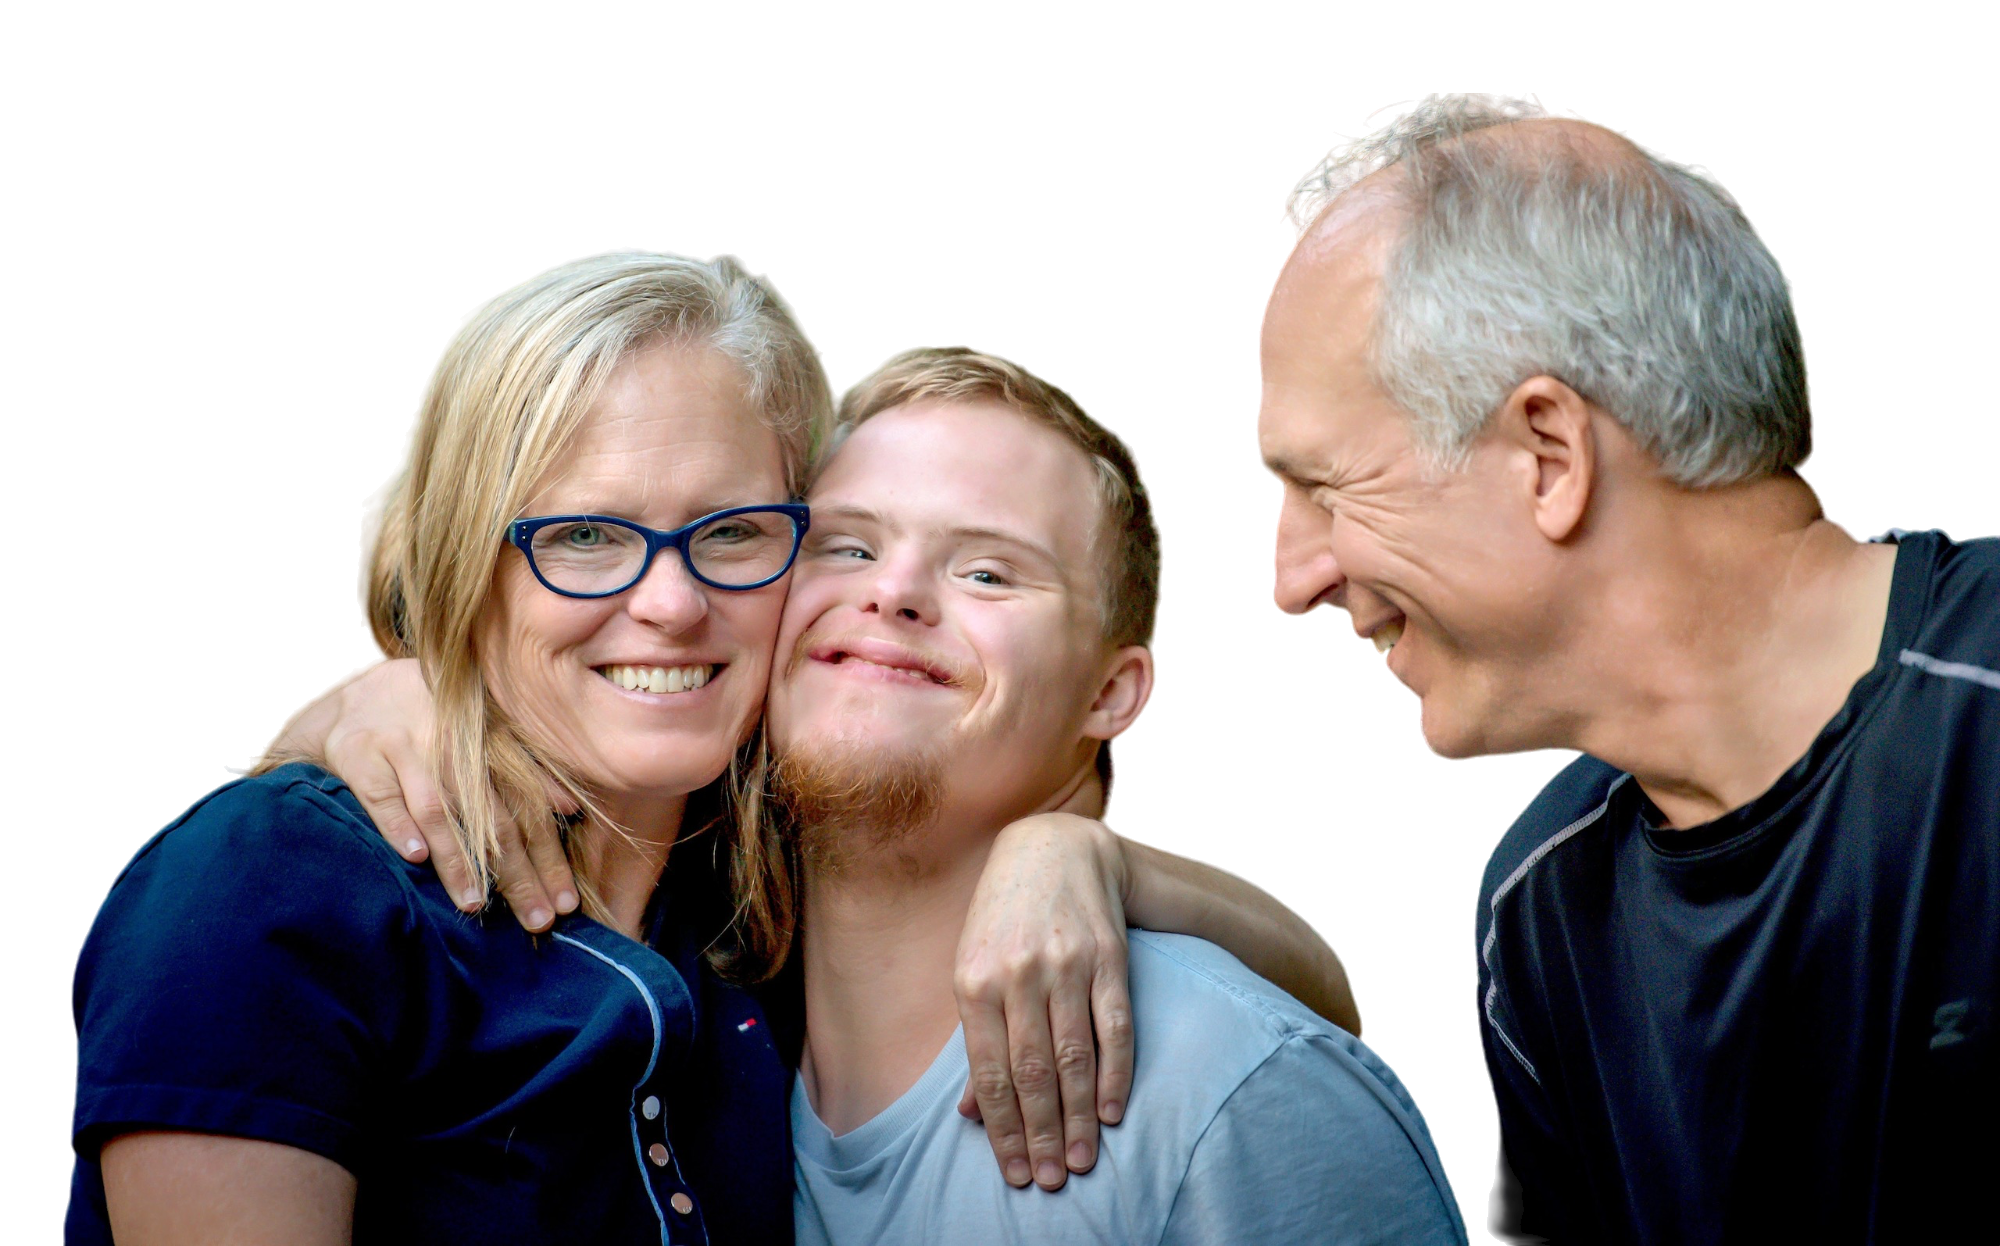 family after background is removed